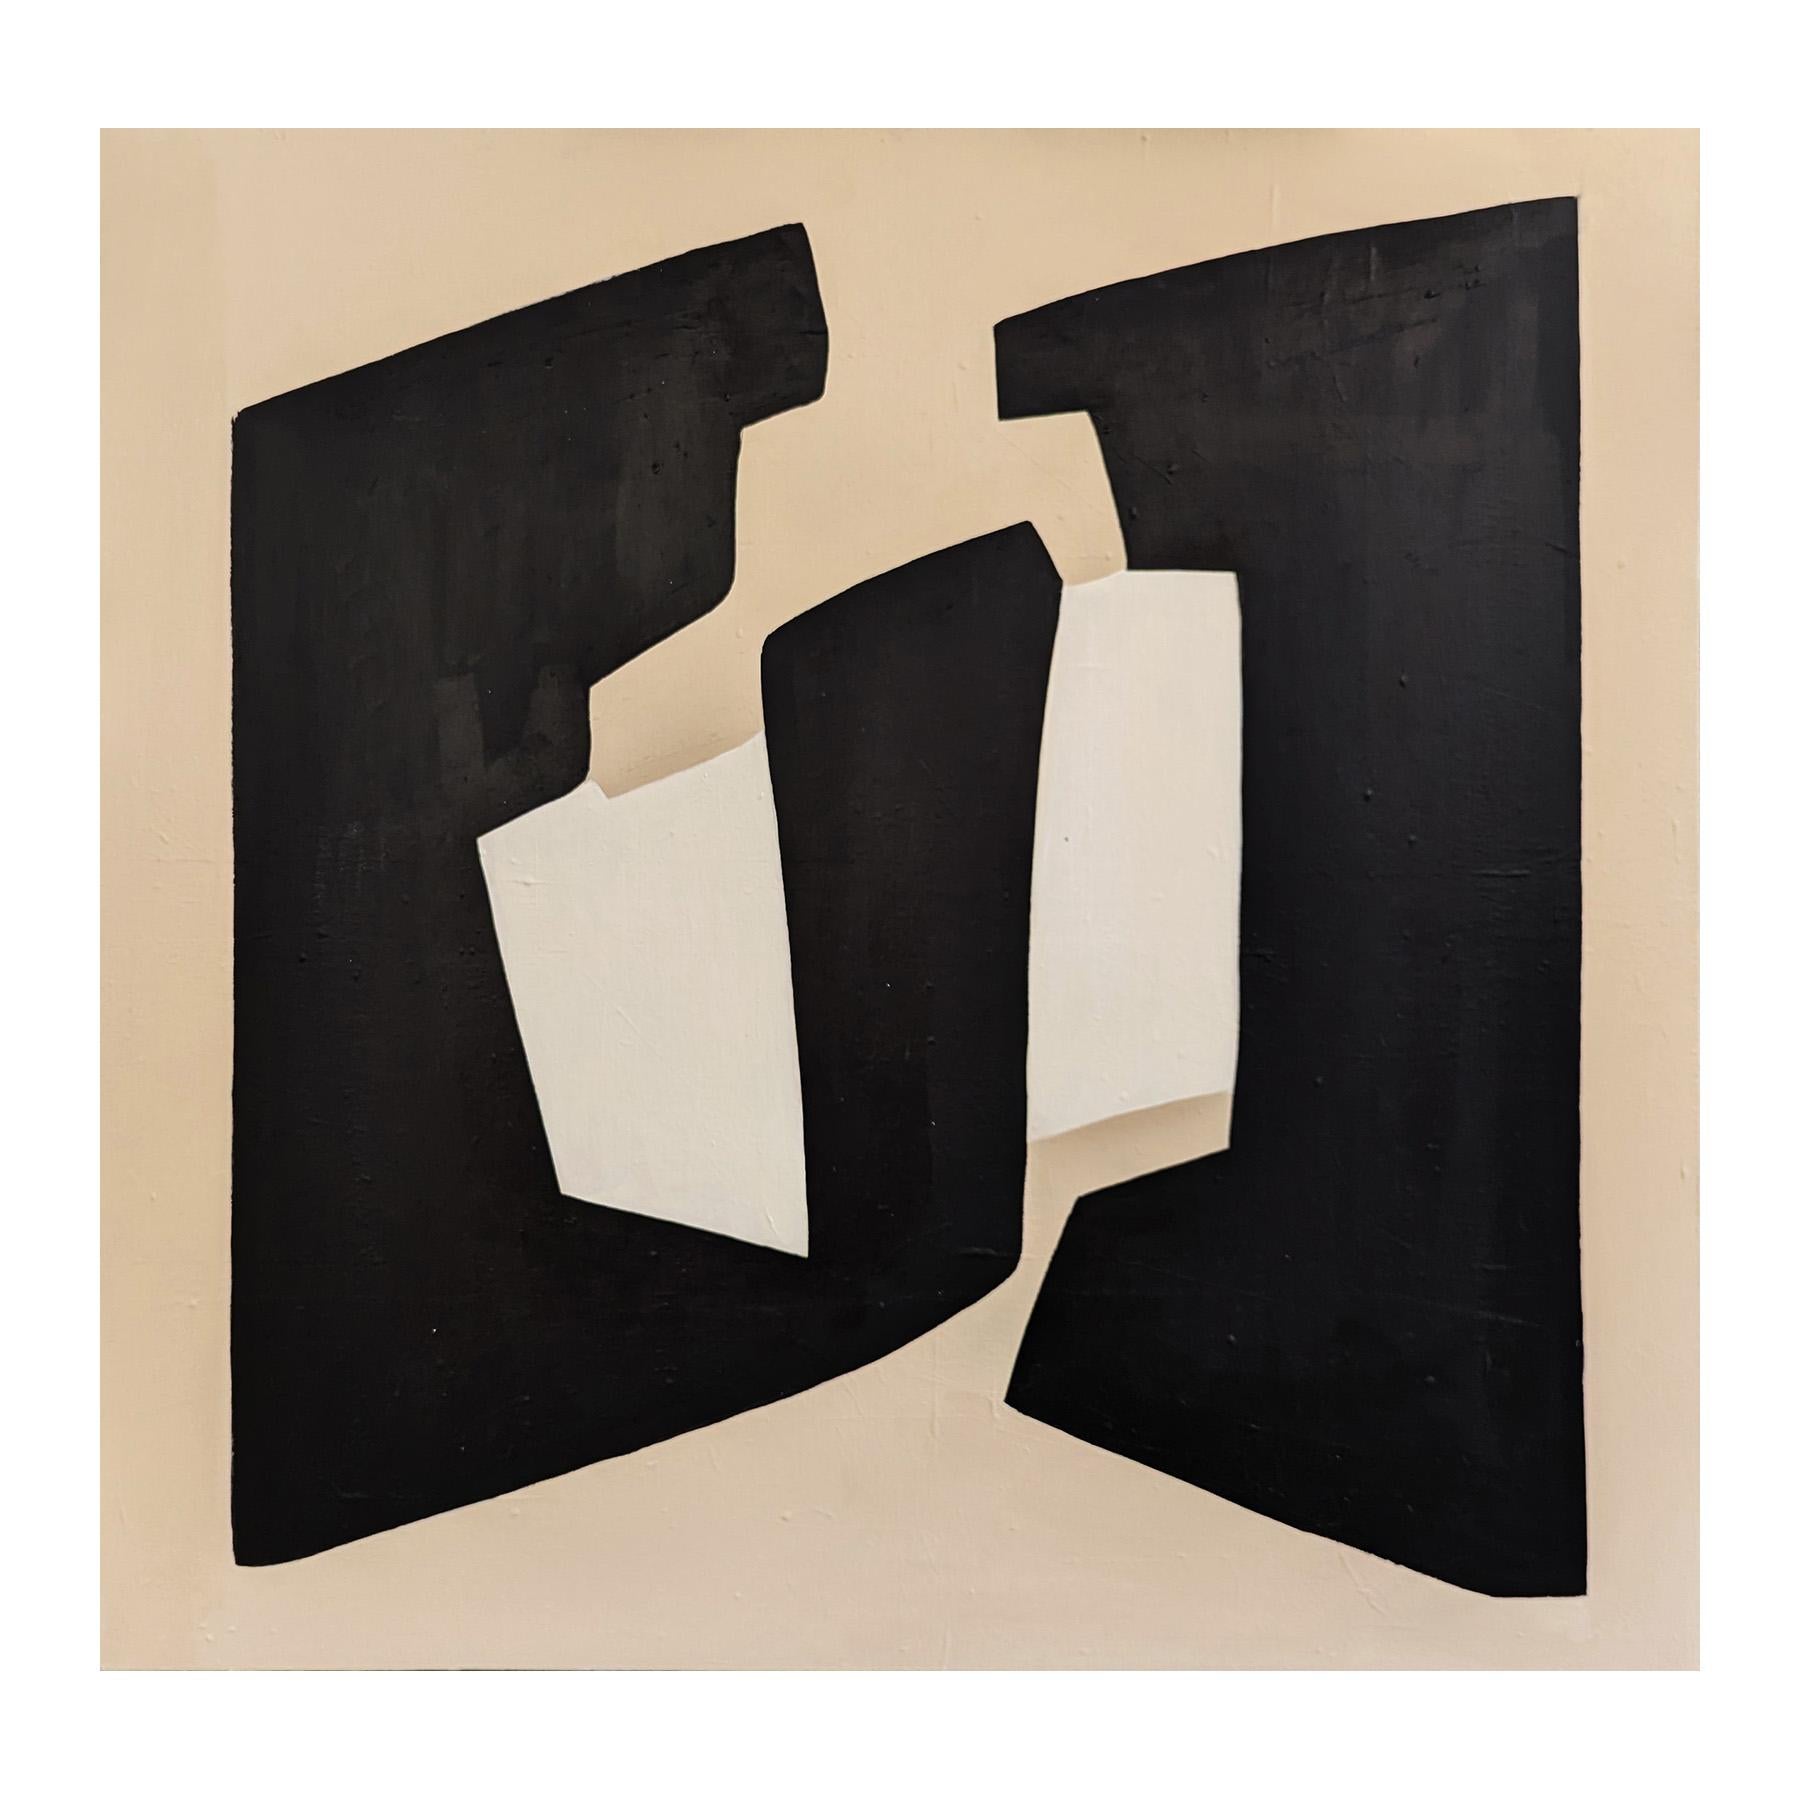 Geometric abstract painting by contemporary artist Stephanie Beukers. The work features layers of hard-edged shapes in black and tan set against a light background. Signed and titled on the reverse. Currently unframed, but options are